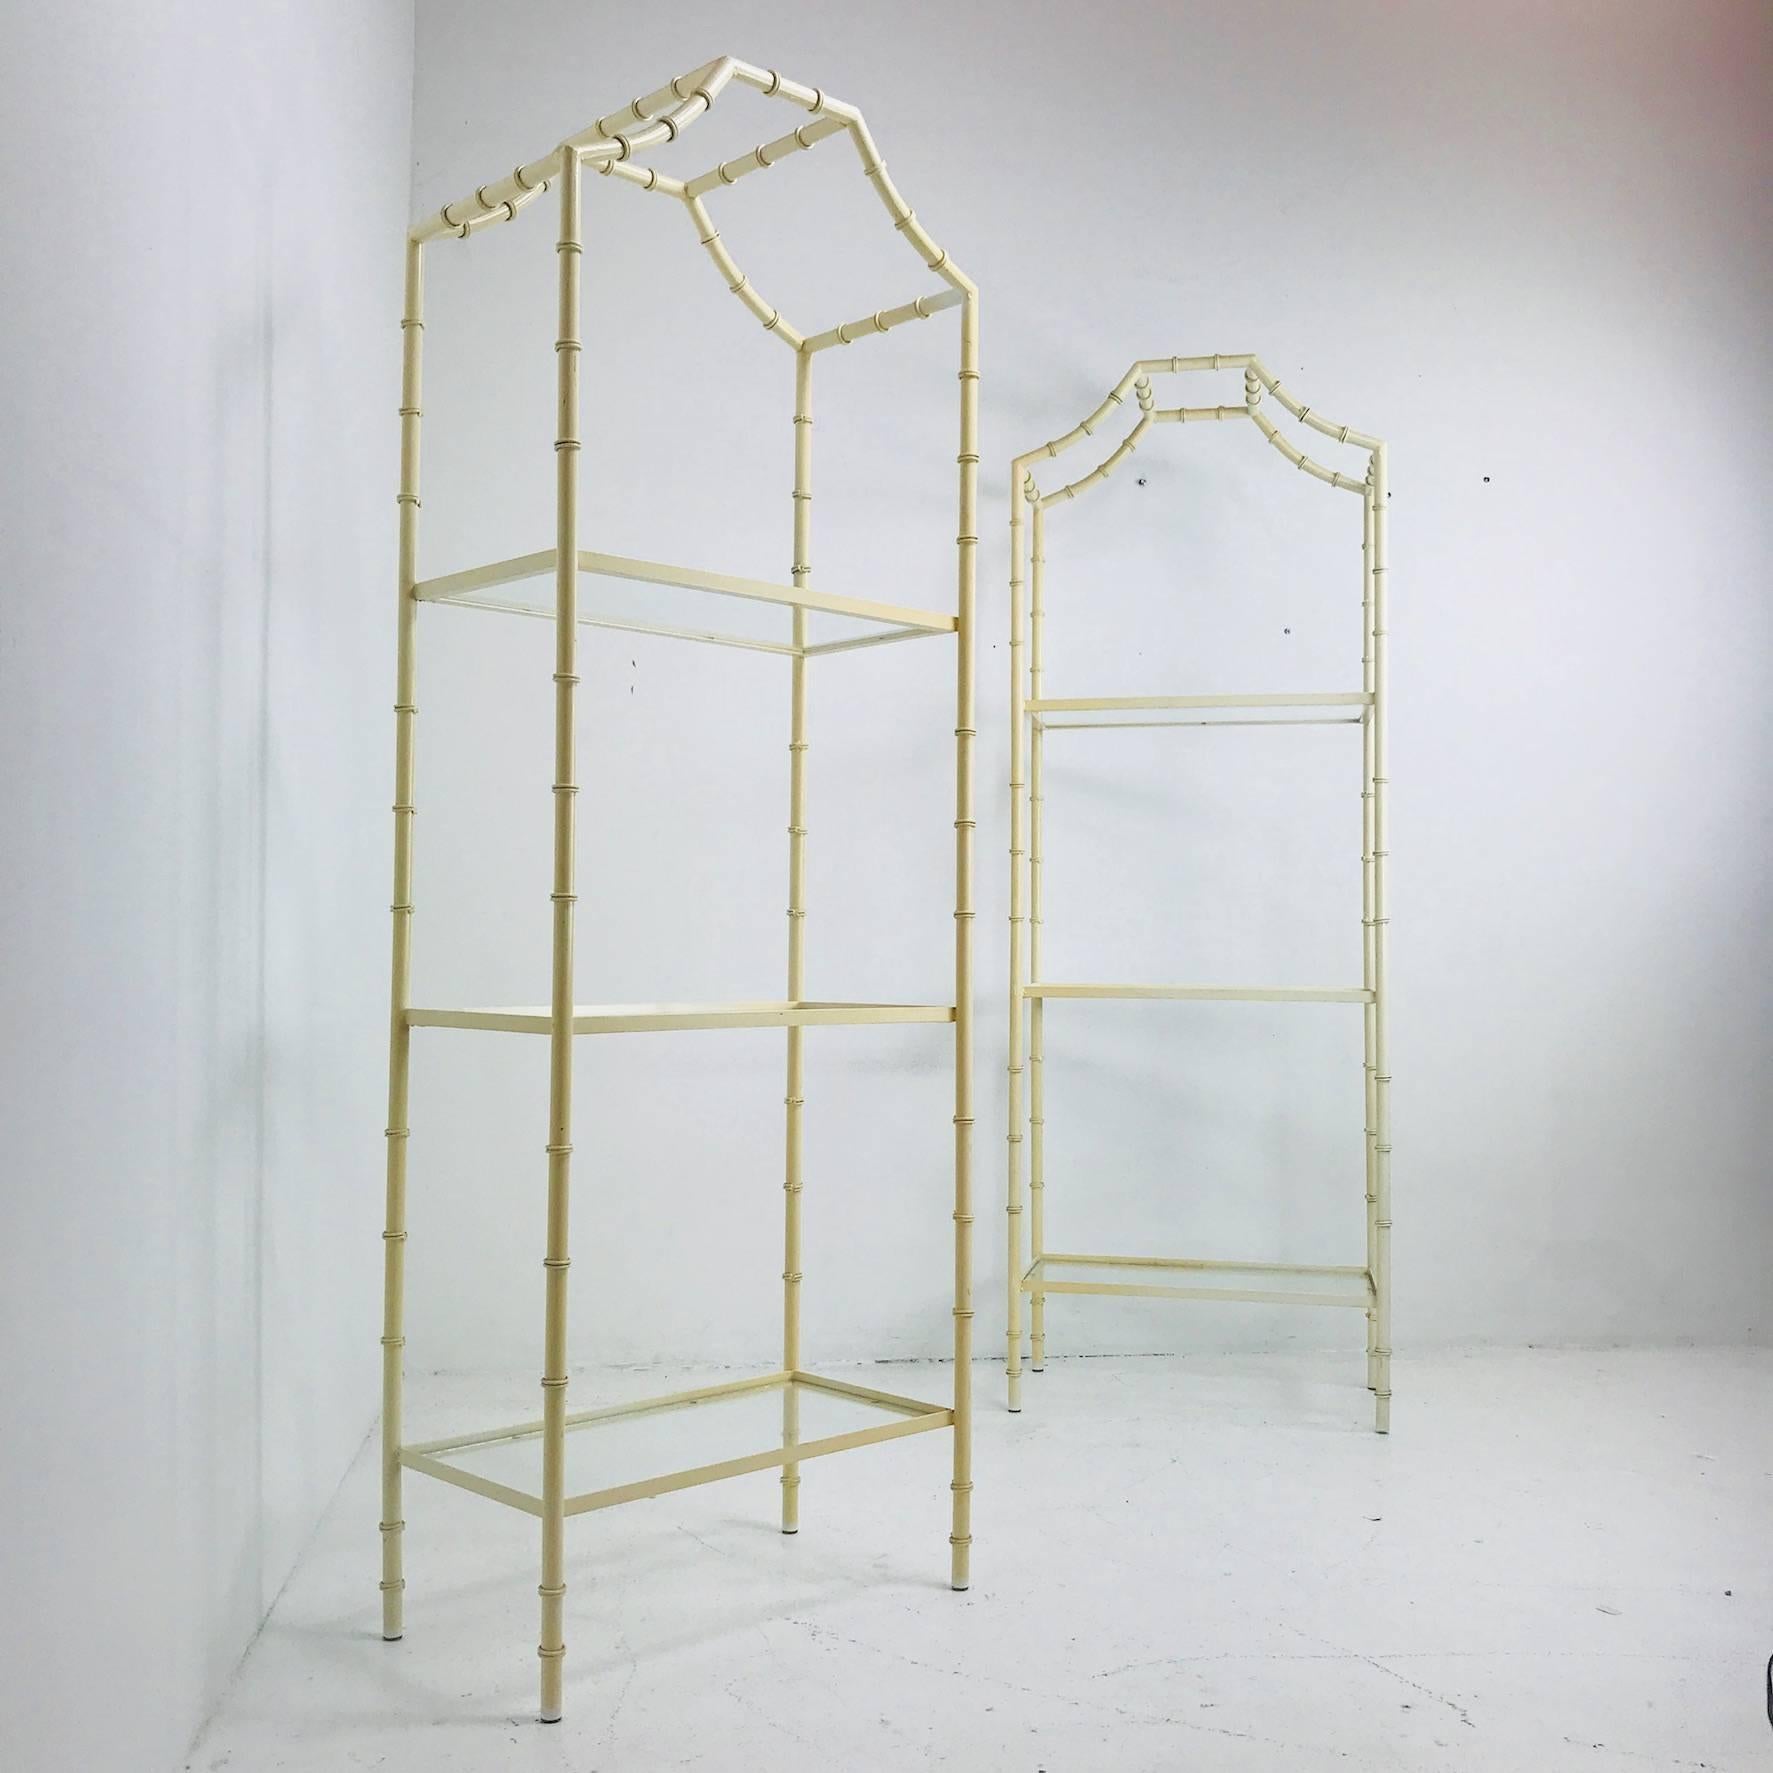 Pair of faux bamboo étagères with glass shelves. In good vintage condition with wear due to age and use. Refinishing is recommended.

Dimensions:
25.5